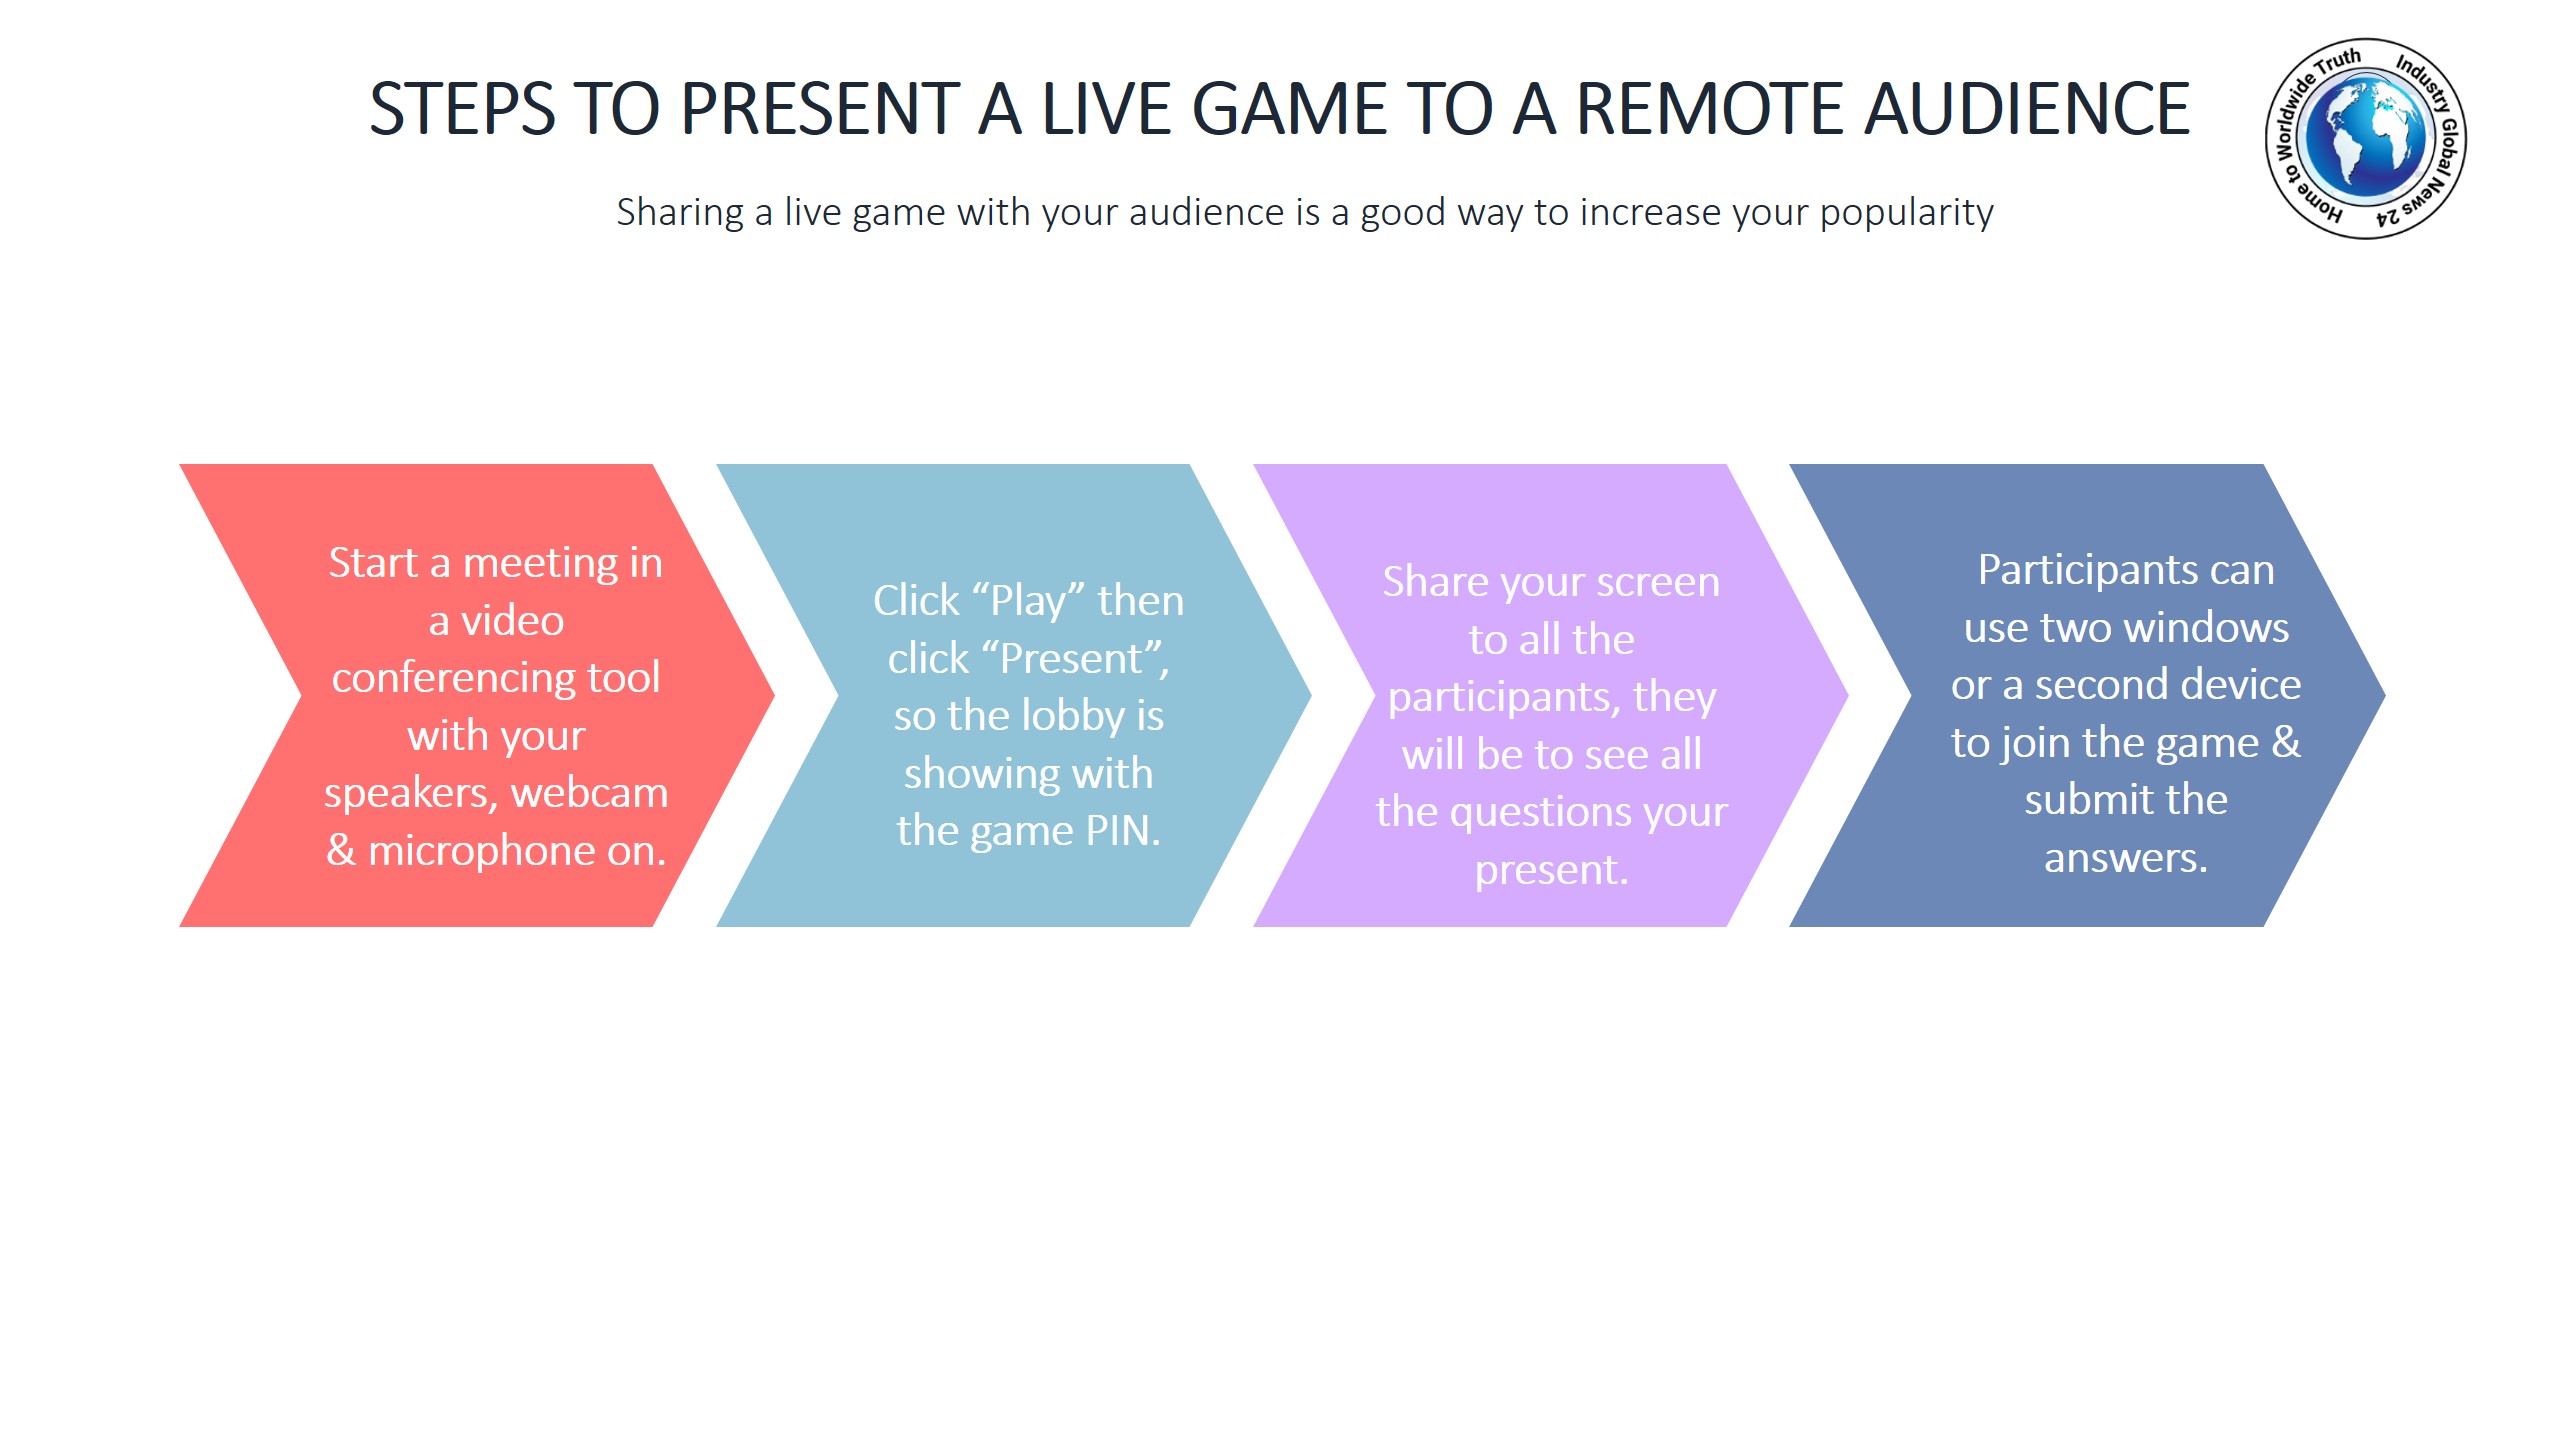 Steps to present a live game to a remote audience